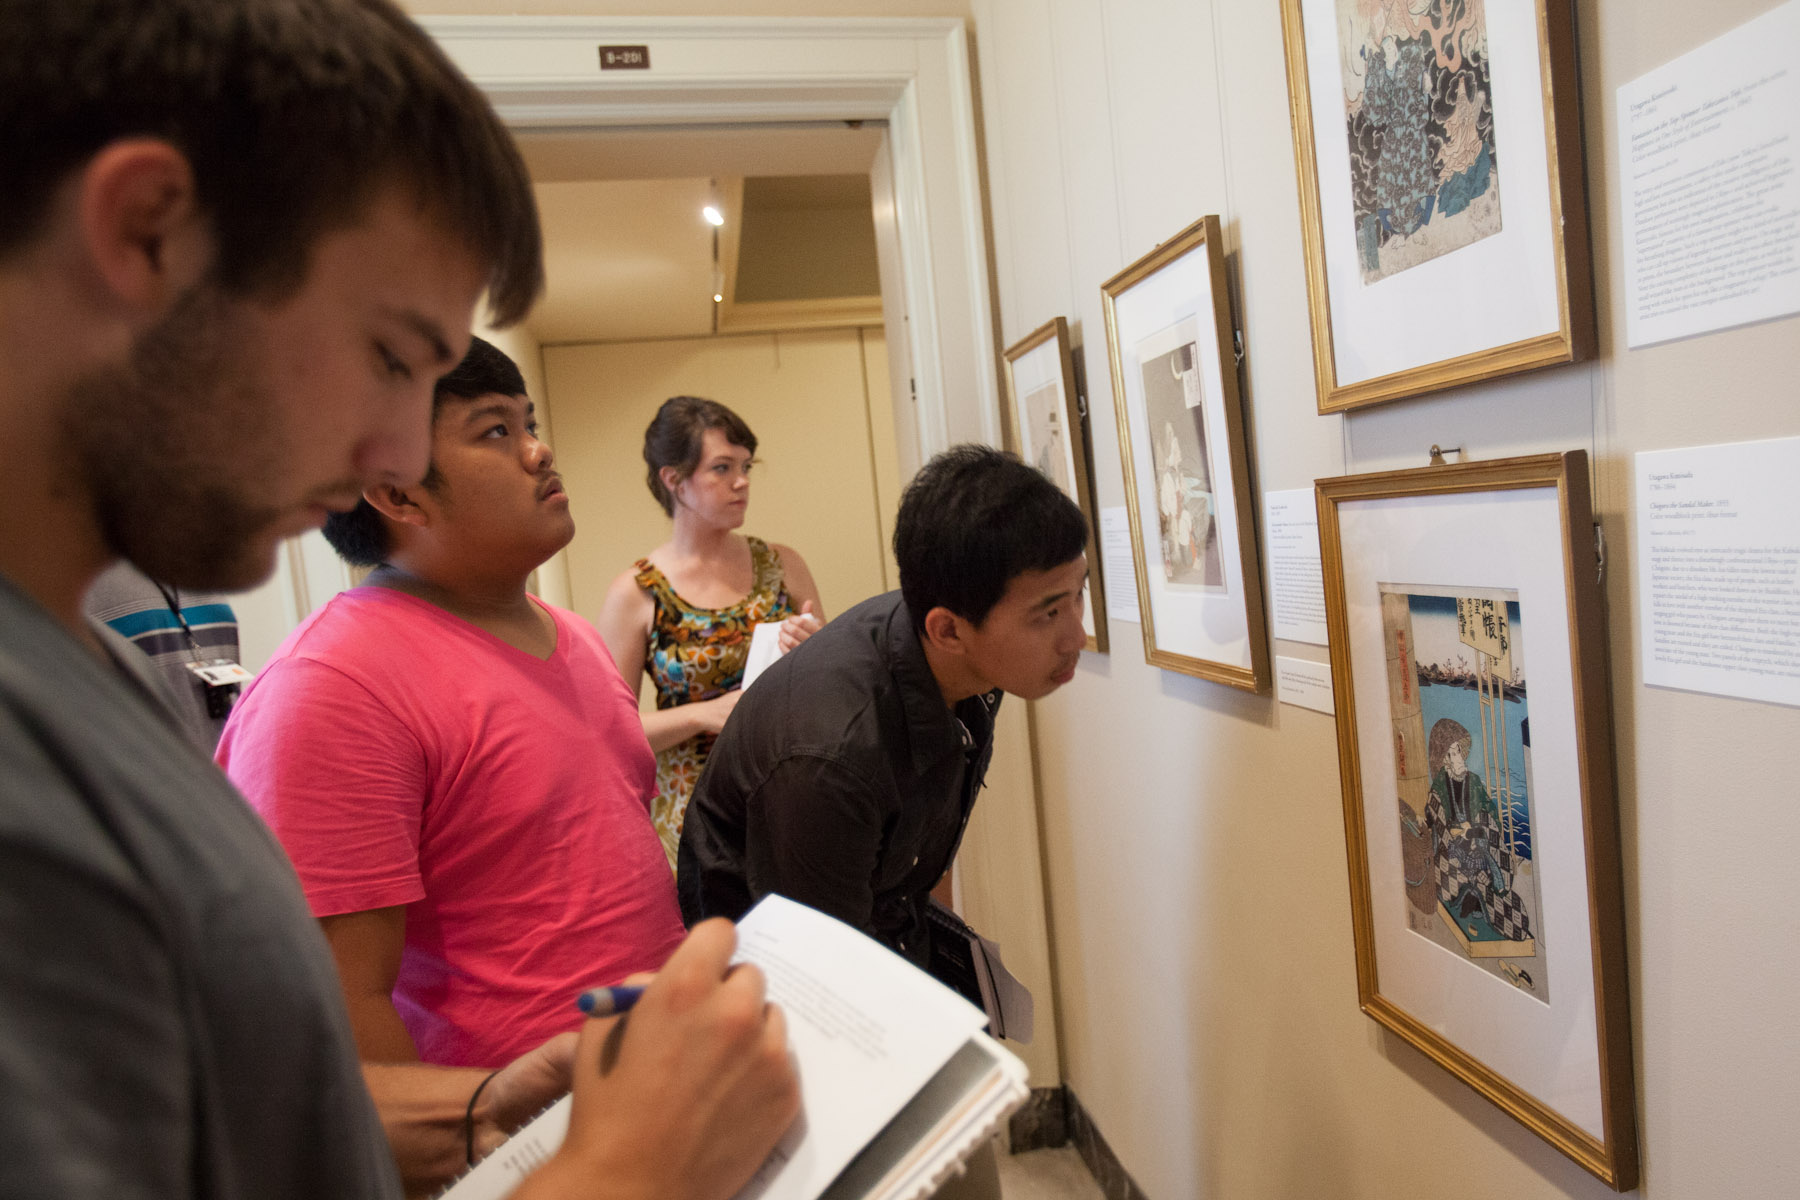 Students observing art work in a gallery and write notes